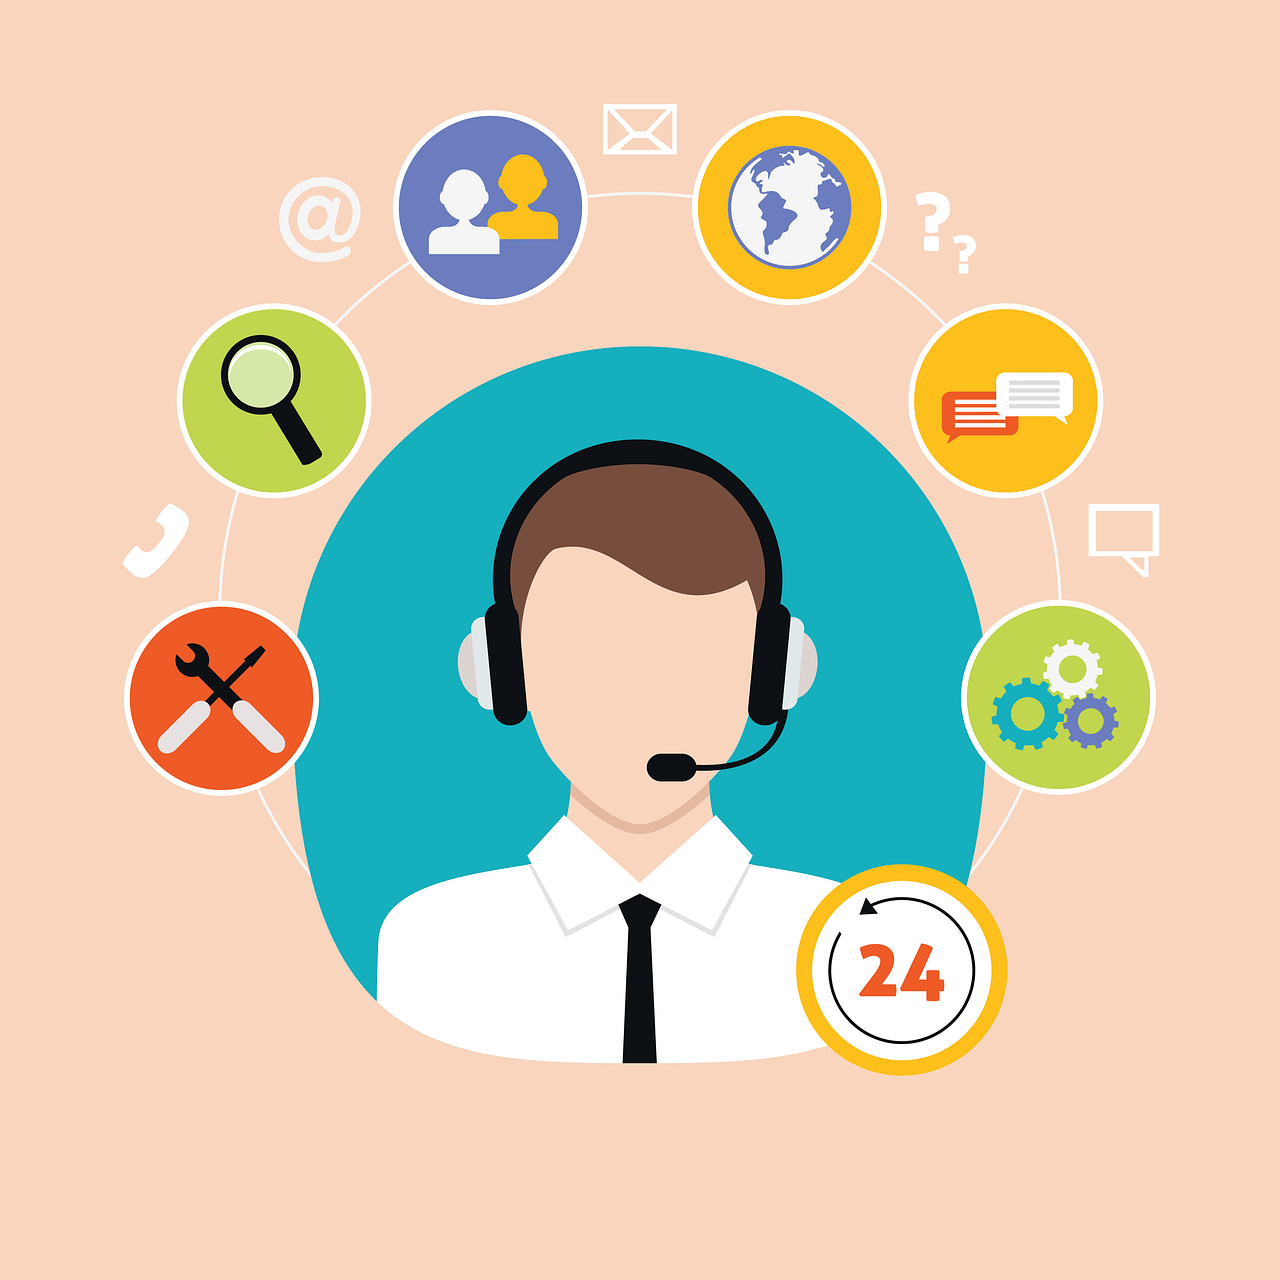 Streamline Your Customer Support Process with viaSocket